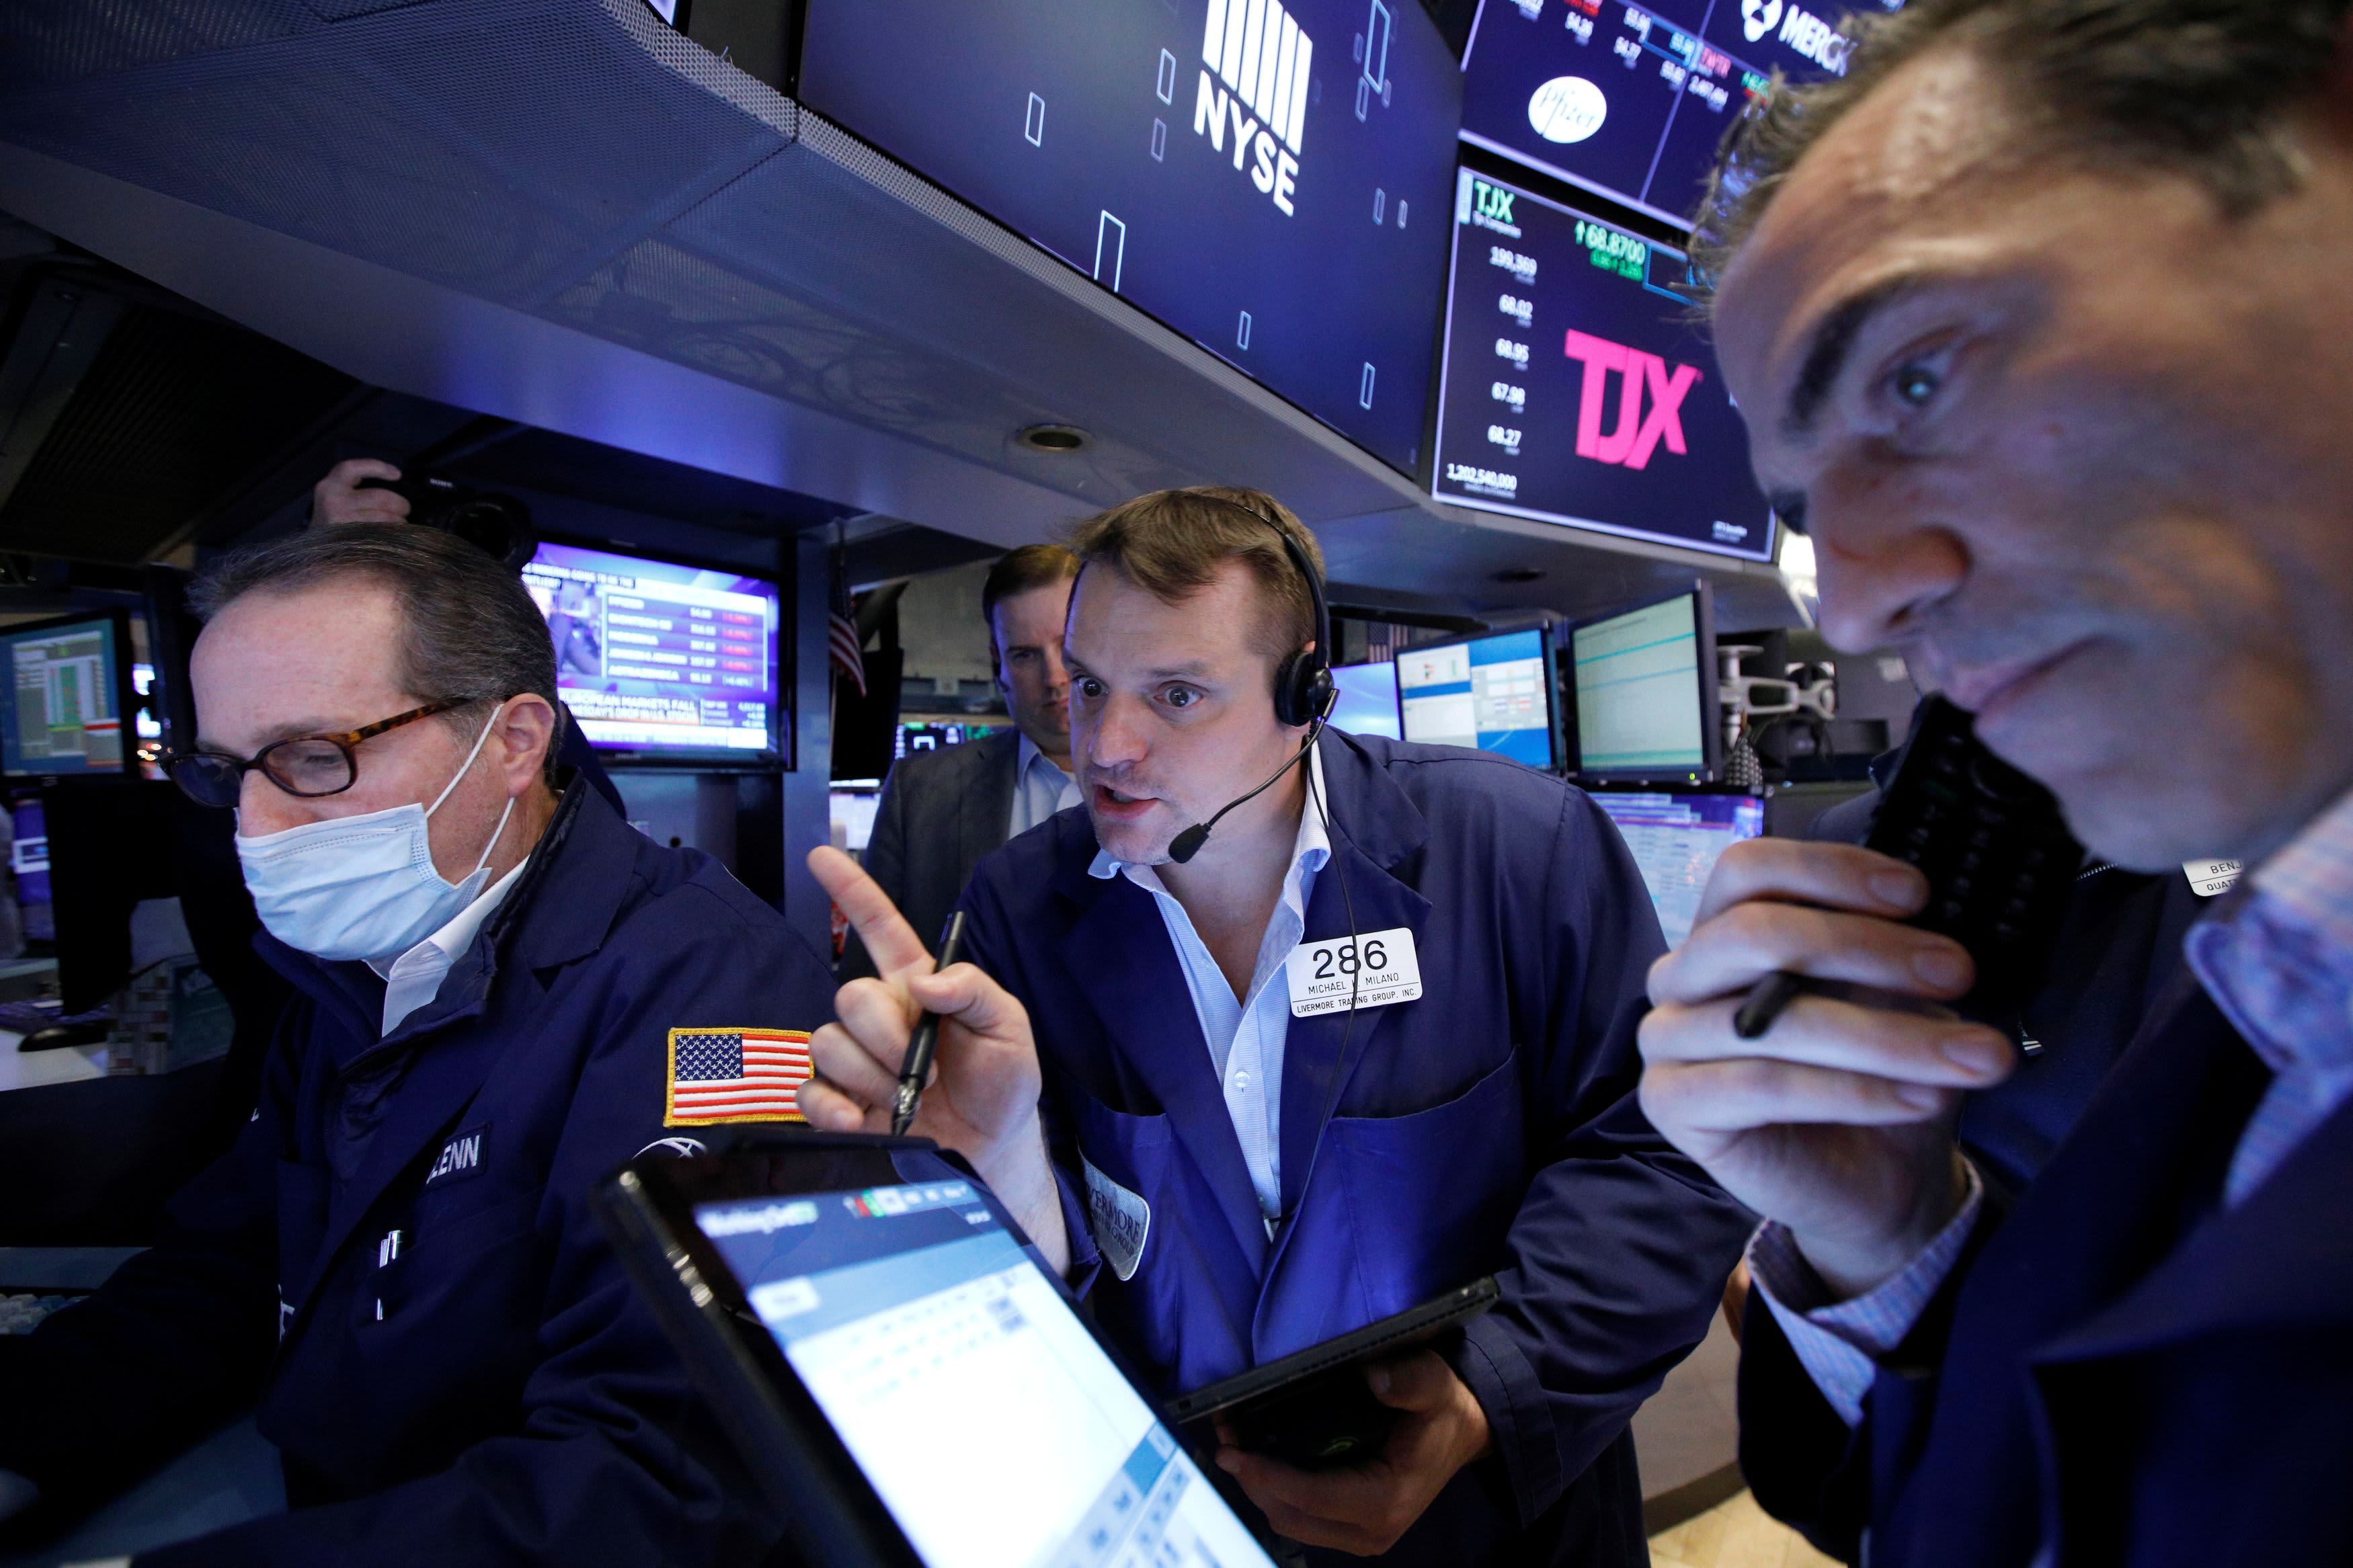 The previous day's rally on Wall Street continued unabated